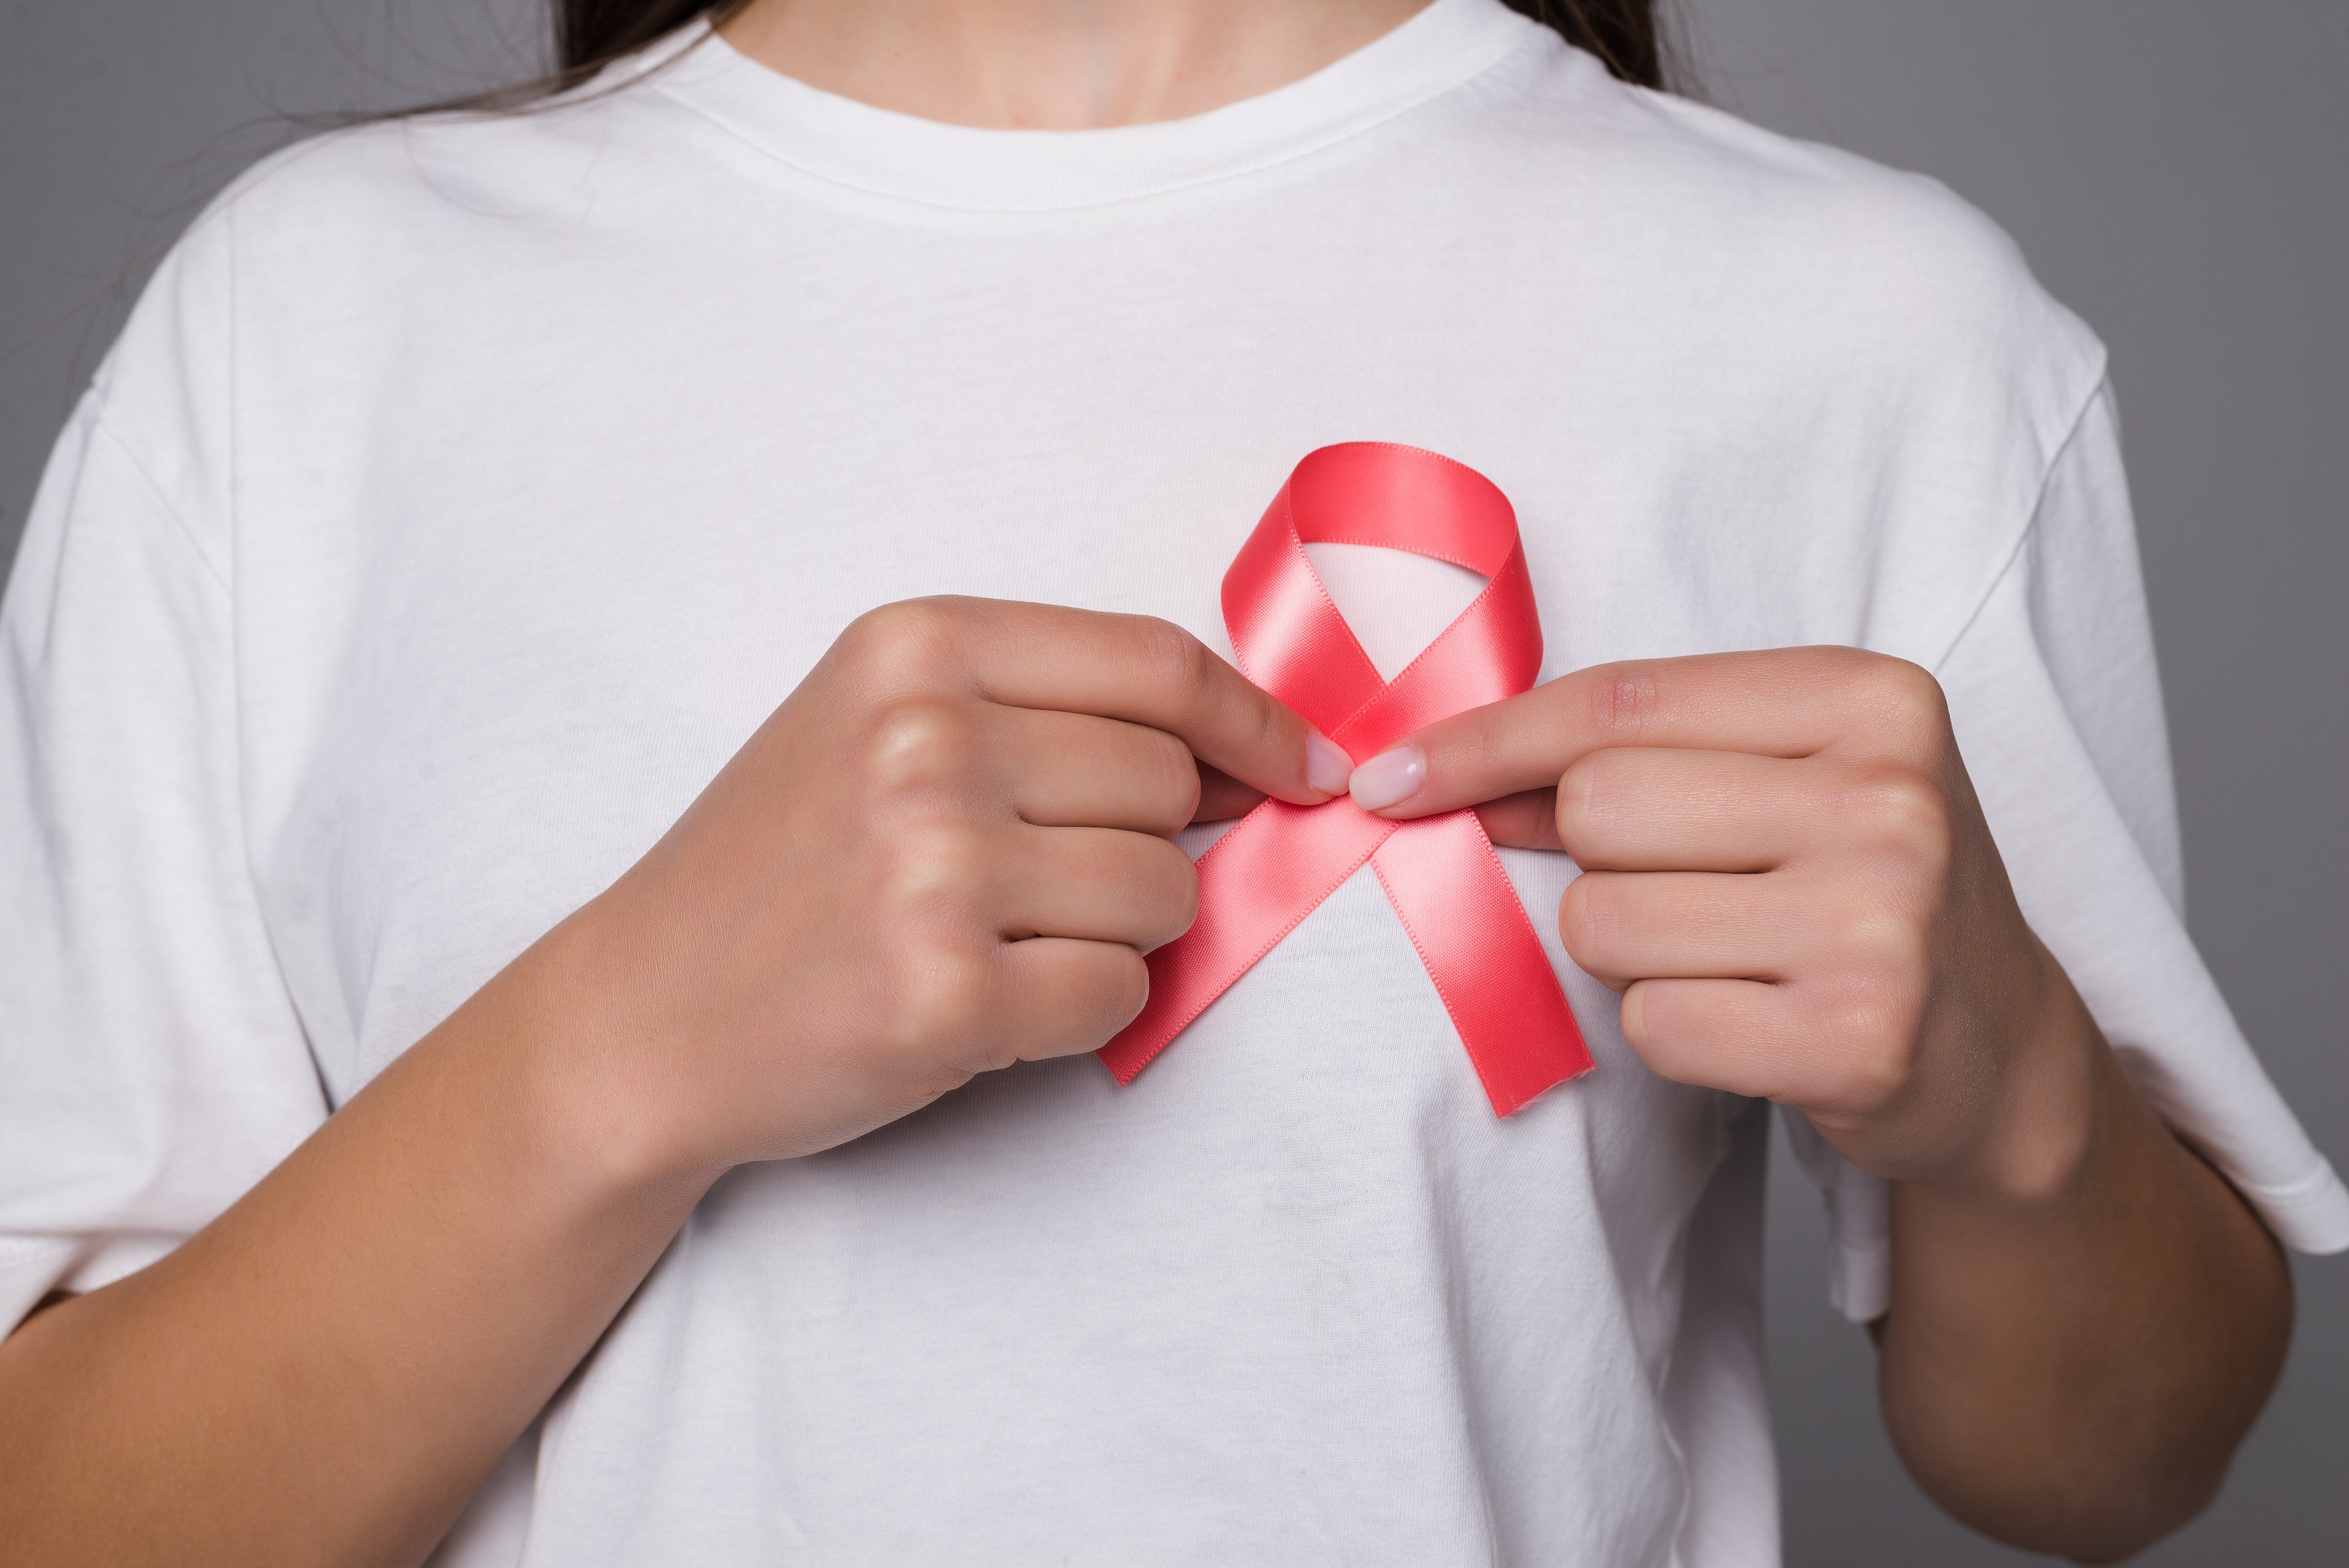 world-breast-cancer-day-concept-health-care-woman-wore-white-t-shirt-with-pink-ribbon-awareness-symbolic-bow-color-raising-people-living-with-women-s-breast-tumor-illness